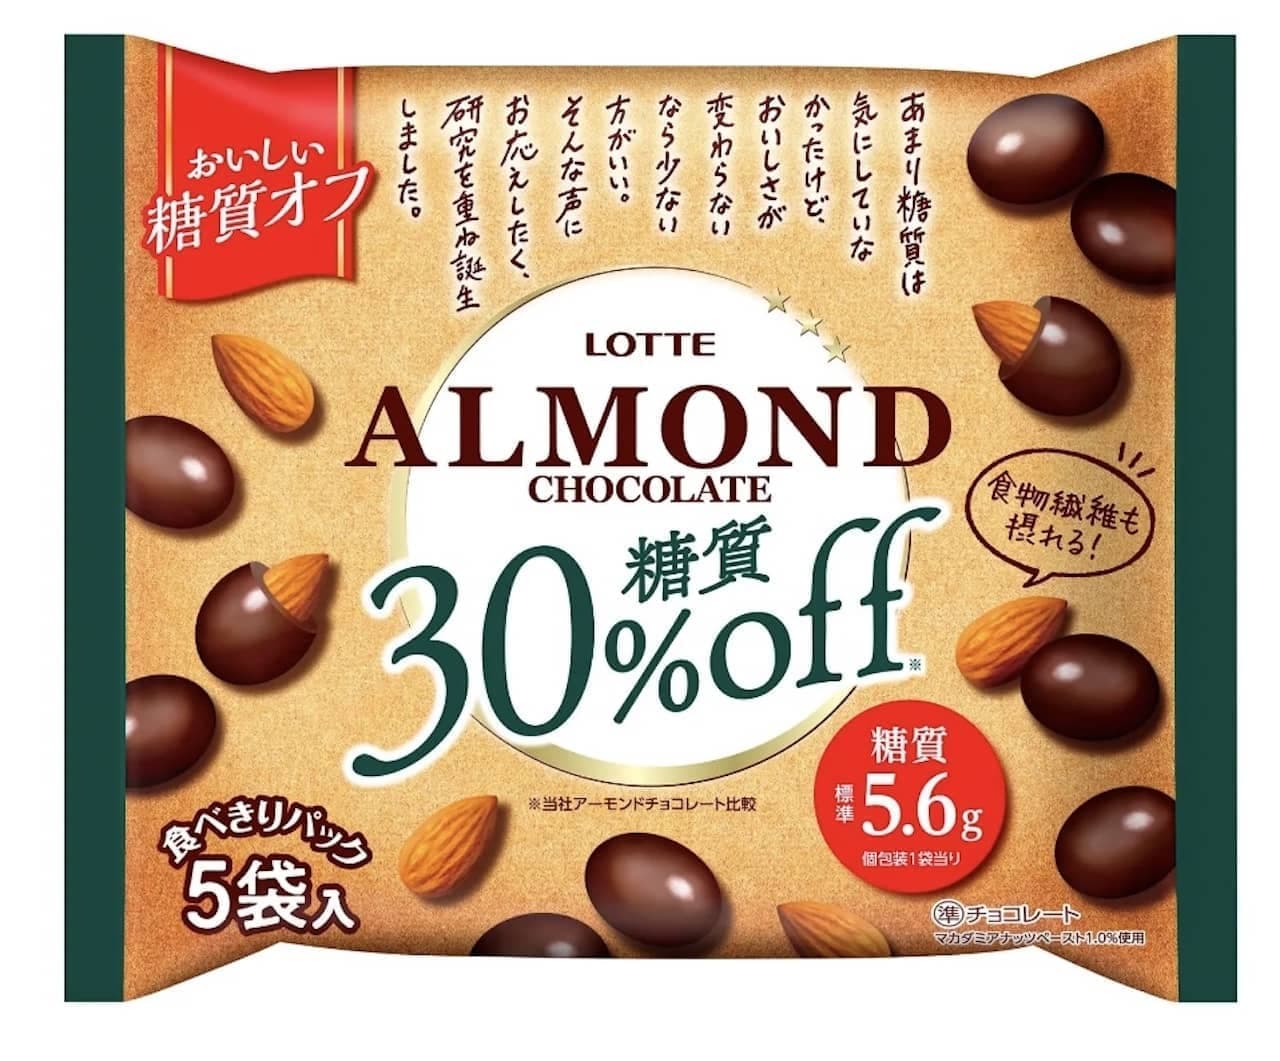 Sugar Free Almond Chocolate Share Pack" from Lotte